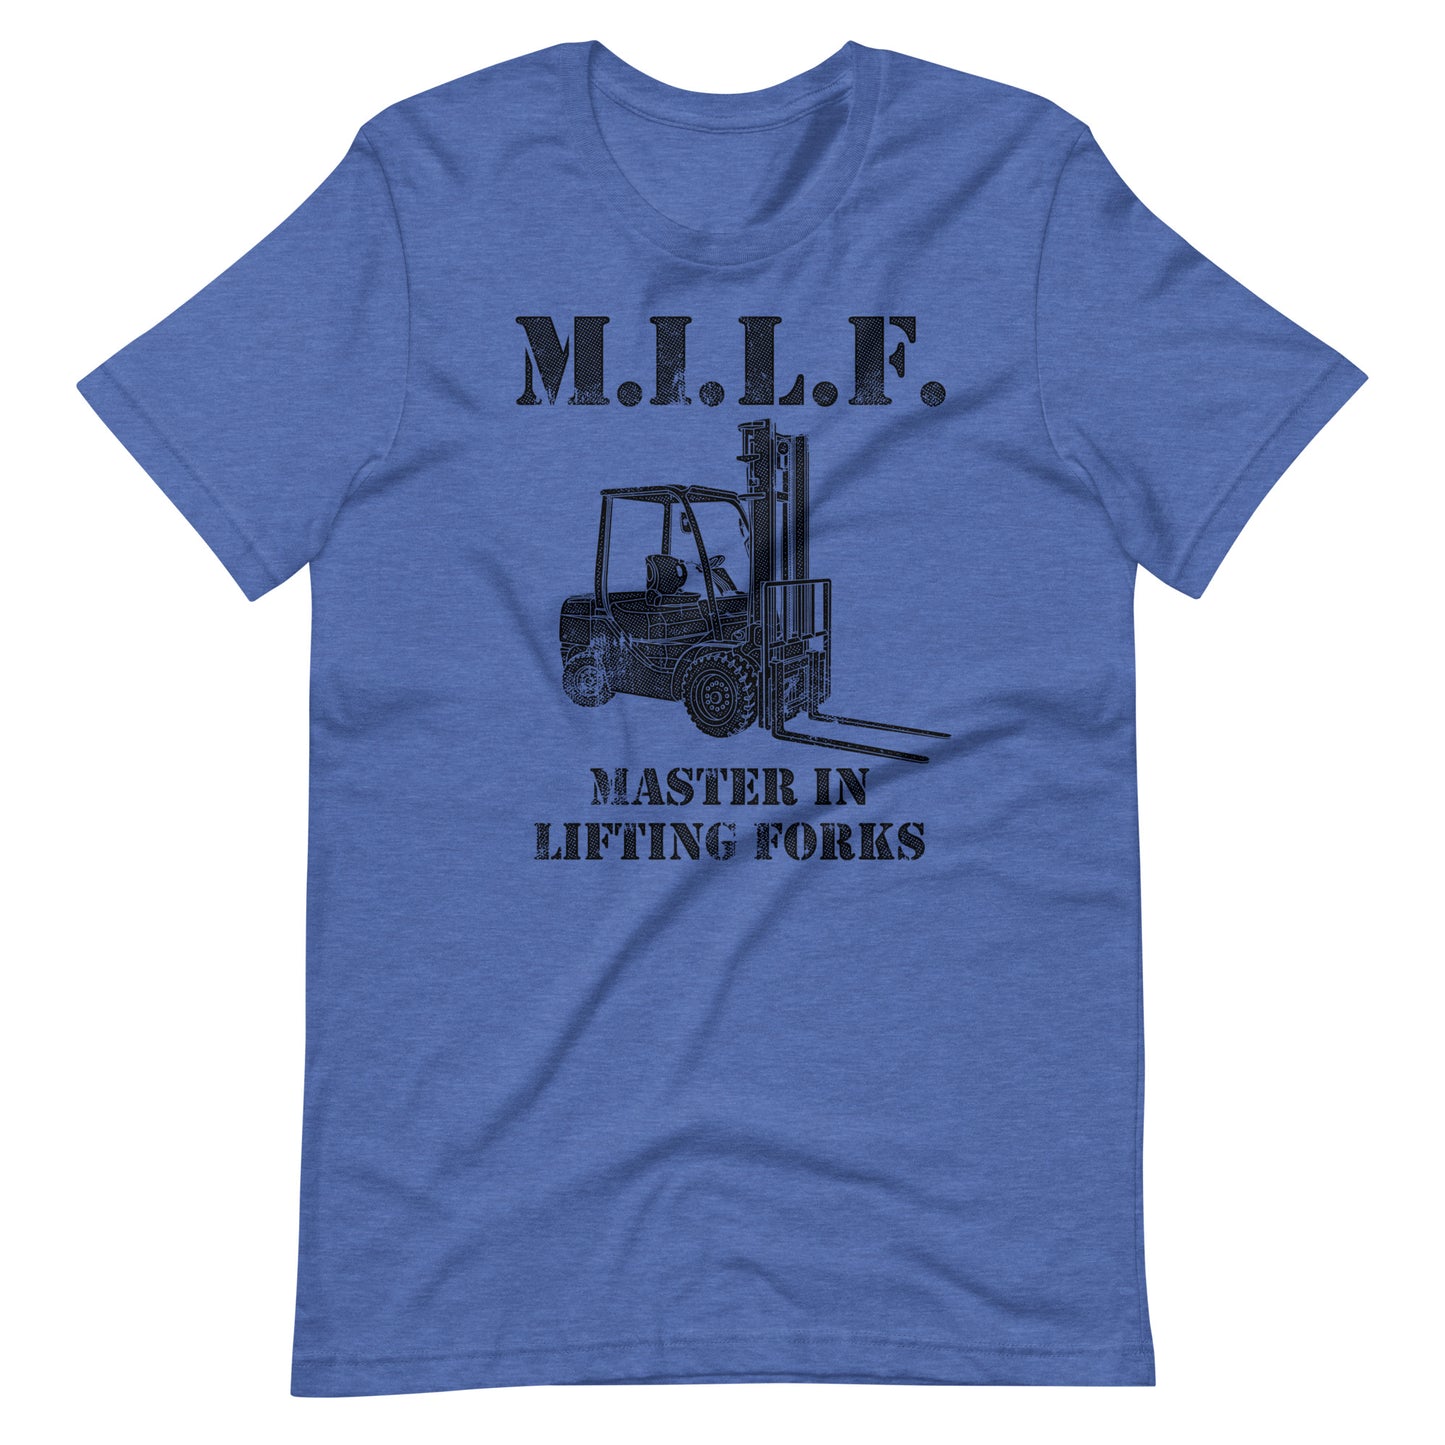 Master In Lifting Forks MILF t-shirt